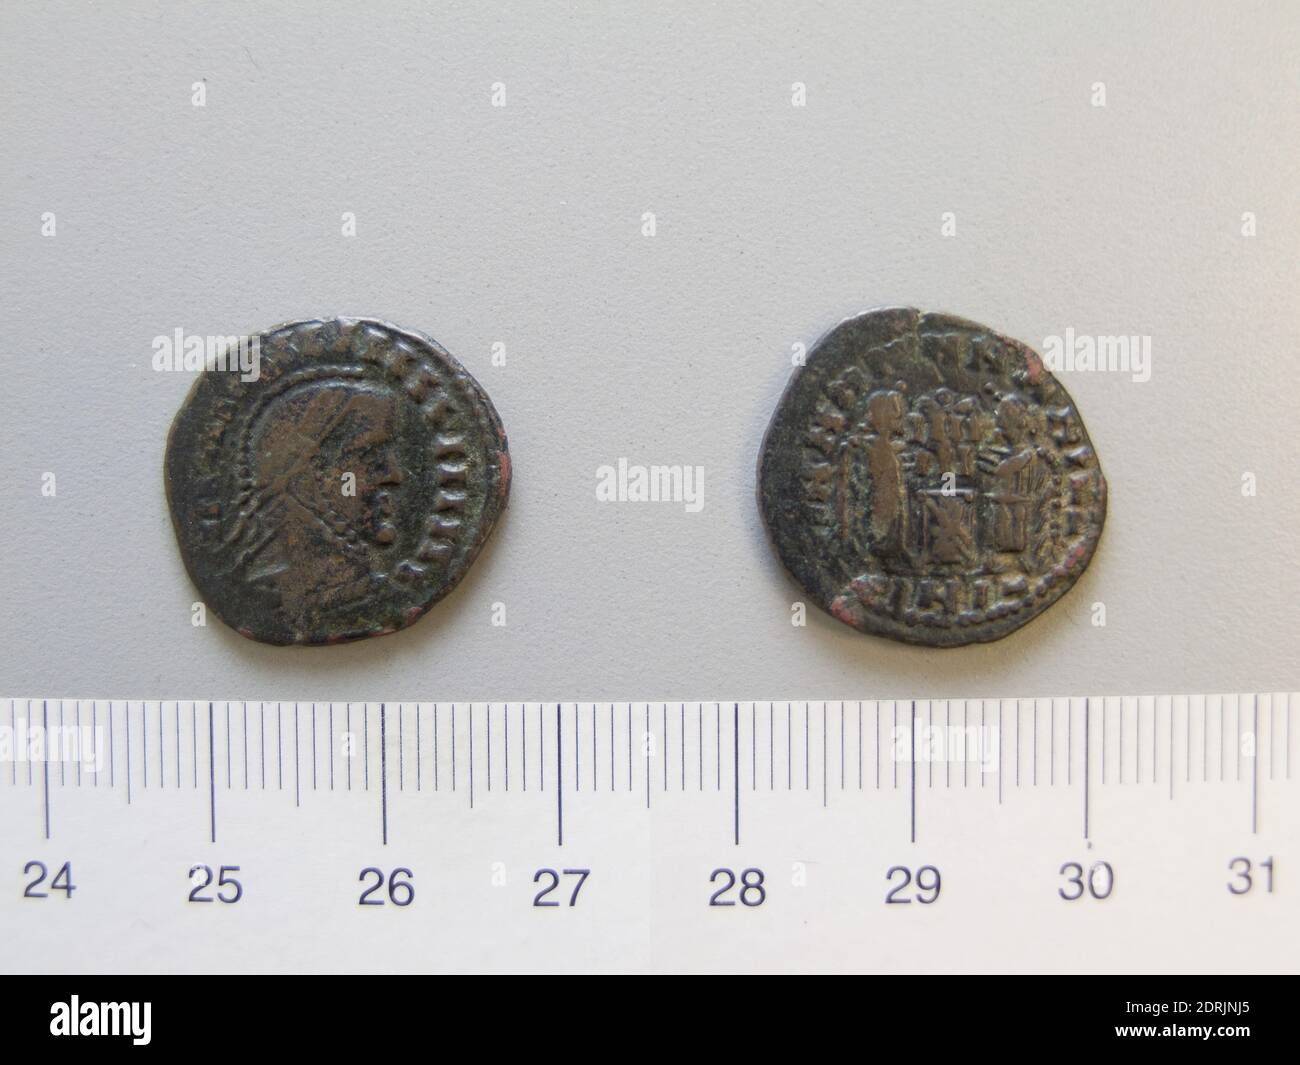 Mint: Board of Revenue, Coin from England, 318–20, Base, 3.00 g, 6:00, 18.5  mm, Made in England, British, 4th century, Numismatics Stock Photo - Alamy